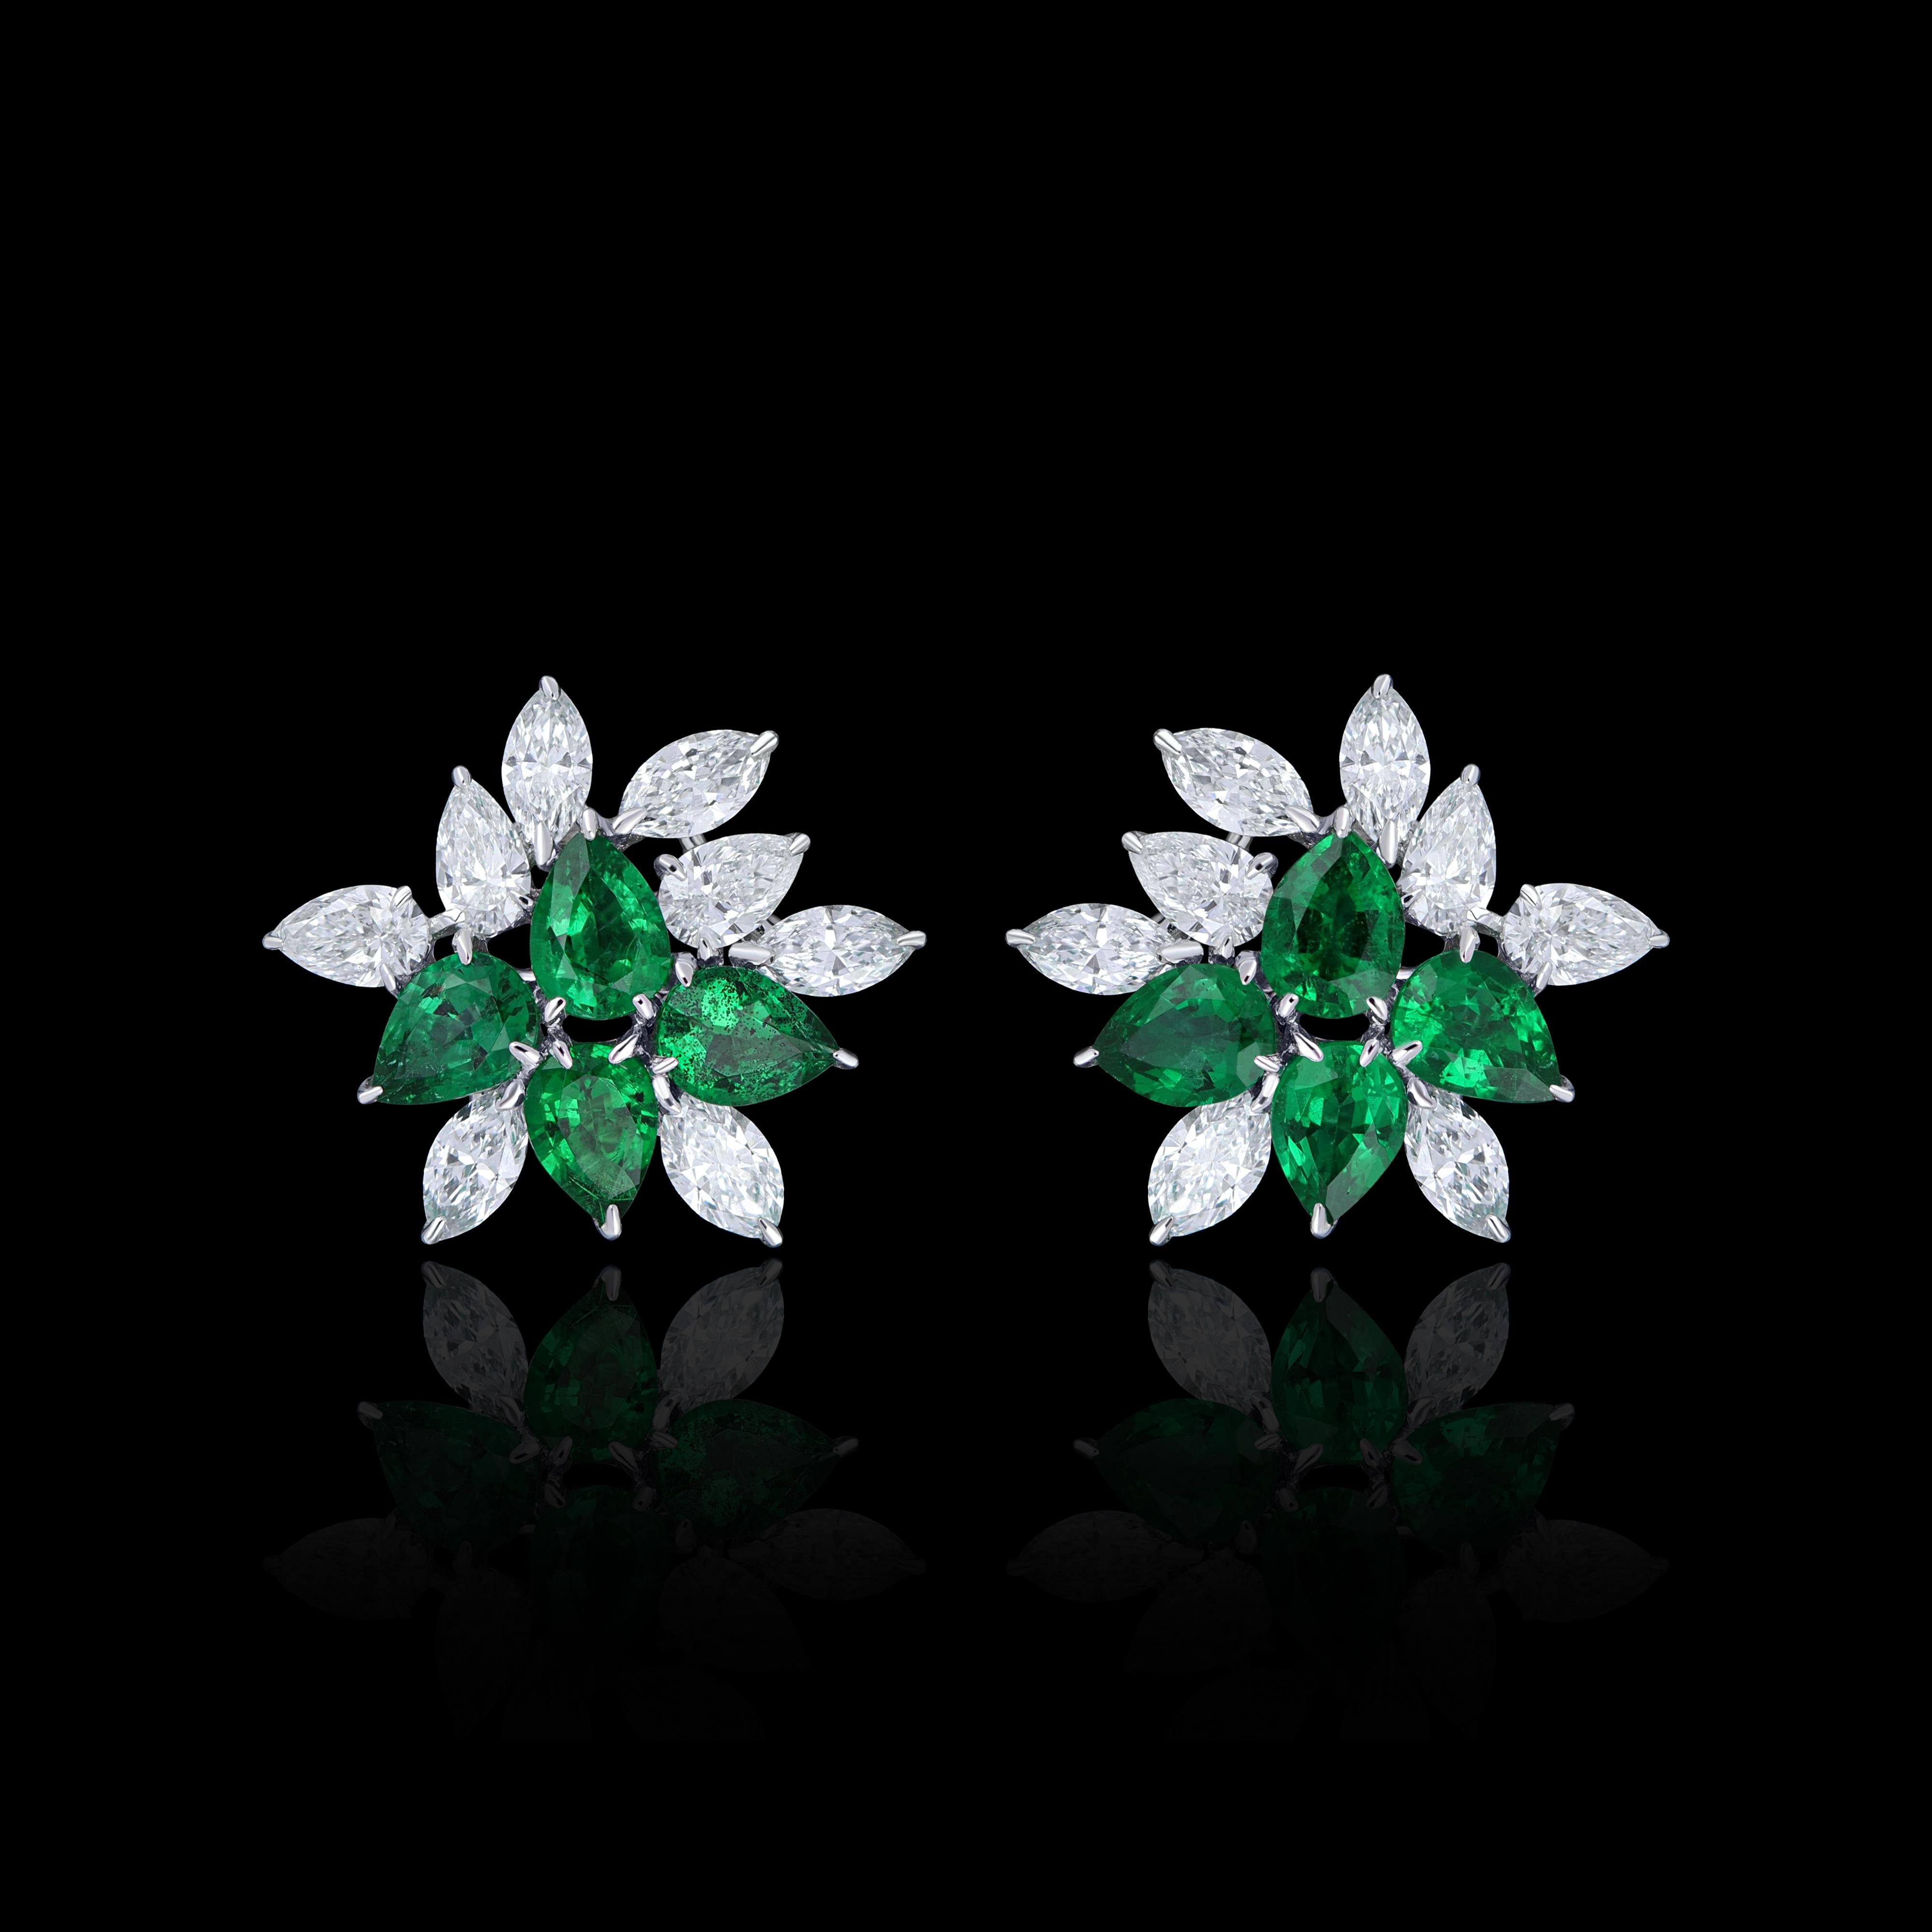 Elegant and exquisitely detailed 18 Karat White Gold Earring, center set with 0.90Cts .Pear Shape Emerald and micro pave set Diamonds, weighing approx. 0.88Cts Beautifully Hand crafted in 18 Karat White Gold.

Stone Detail:
Emerald: 4x3MM

Stone